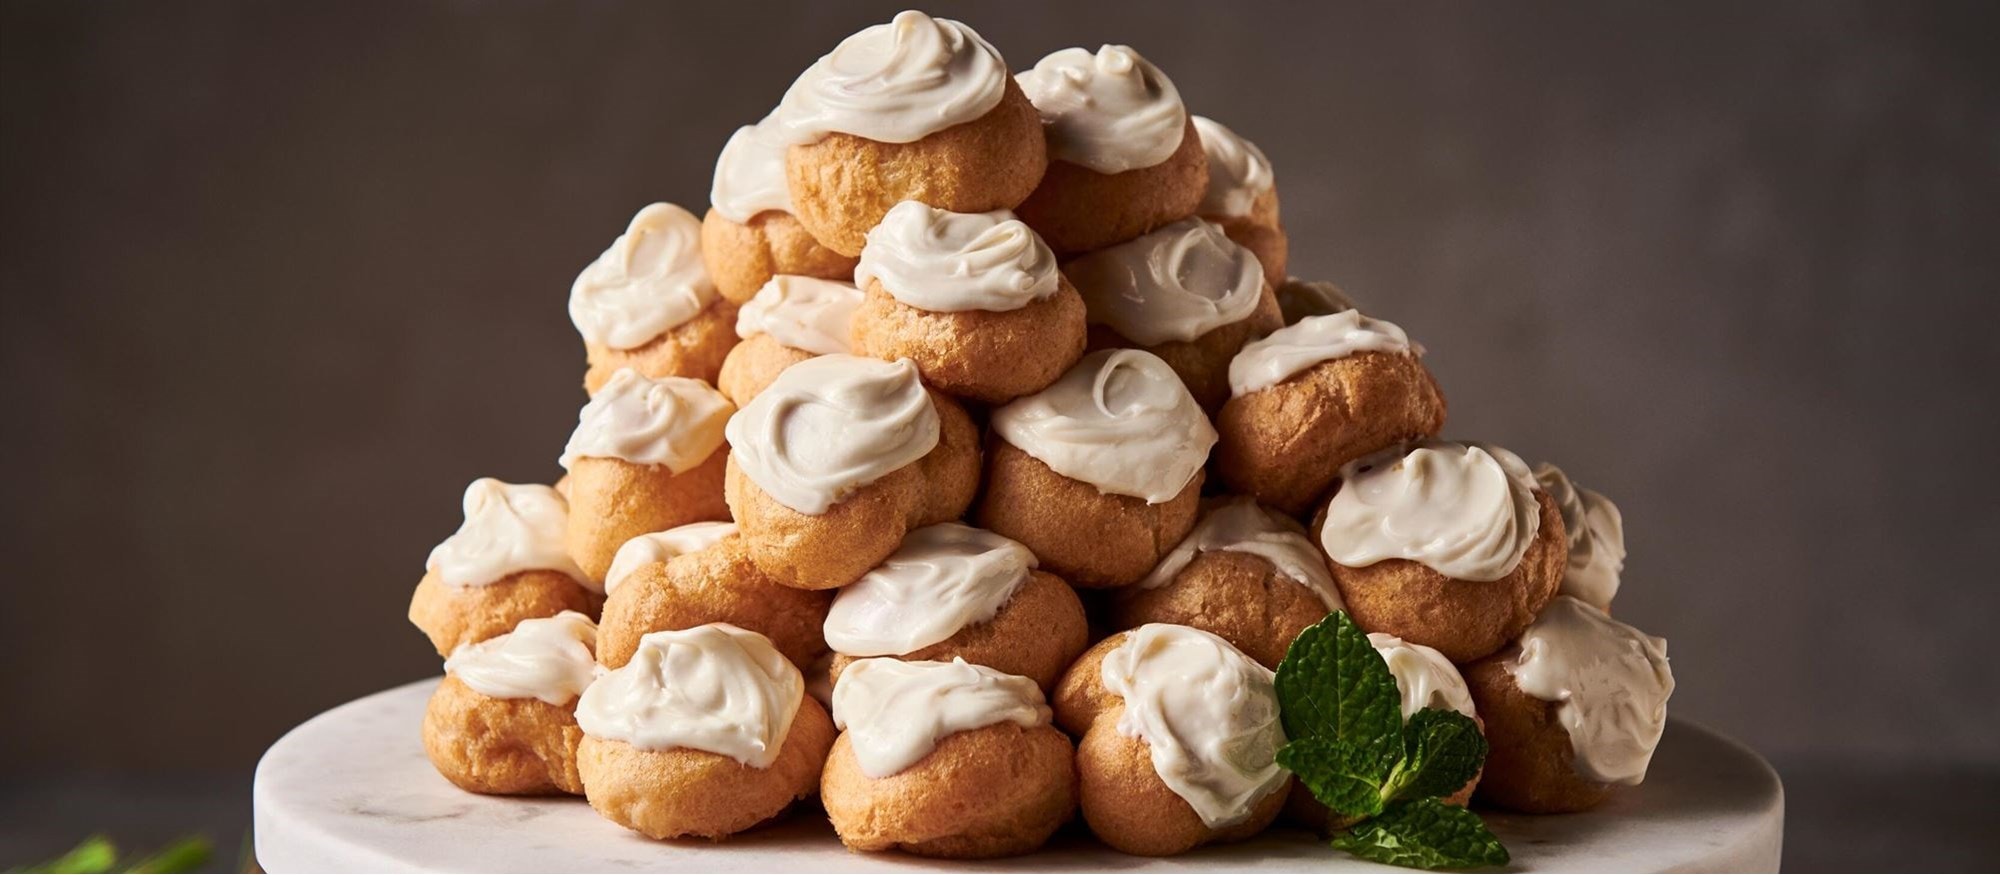 Easy and delicious Profiteroles with White Chocolate Ganache recipe using the Full Range Mode setting of your Wolf Oven